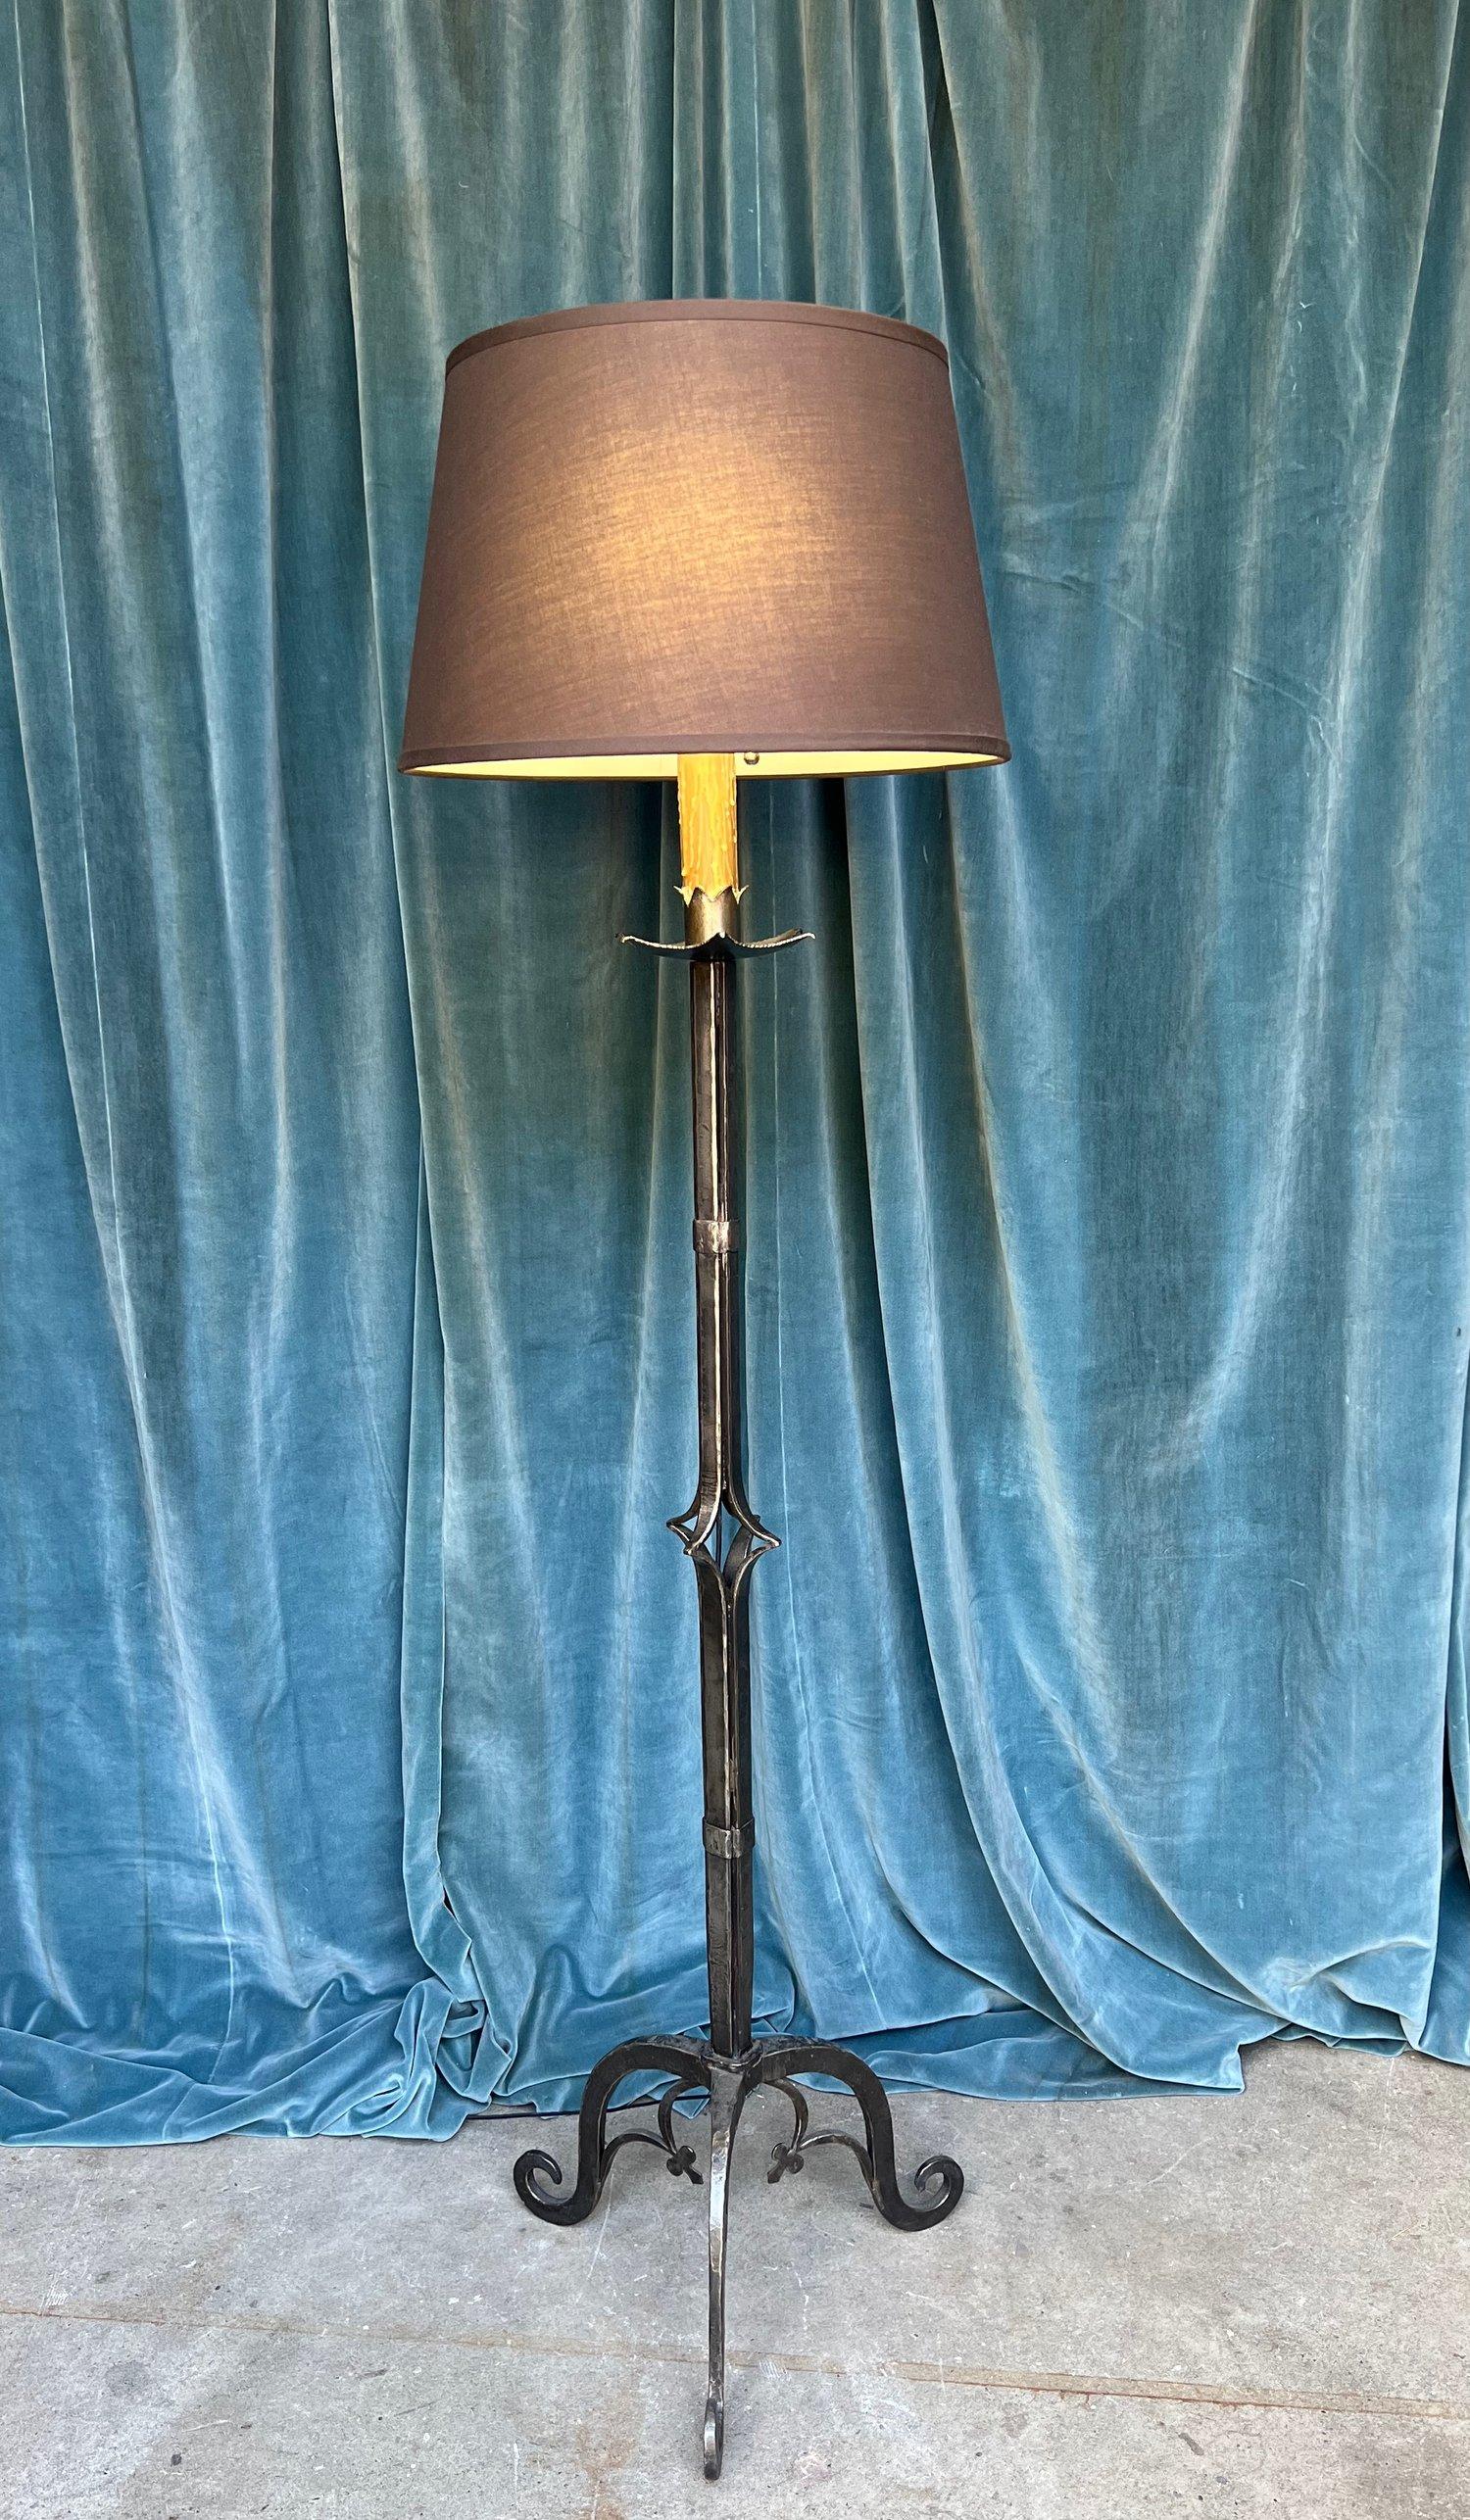 Introducing a very unique French iron floor lamp from the 1940s. This statement piece is a perfect addition to any living room, library, or sunroom. Made from solid wrought iron, the lamp boasts a hand-polished surface that reveals a rich, darkened